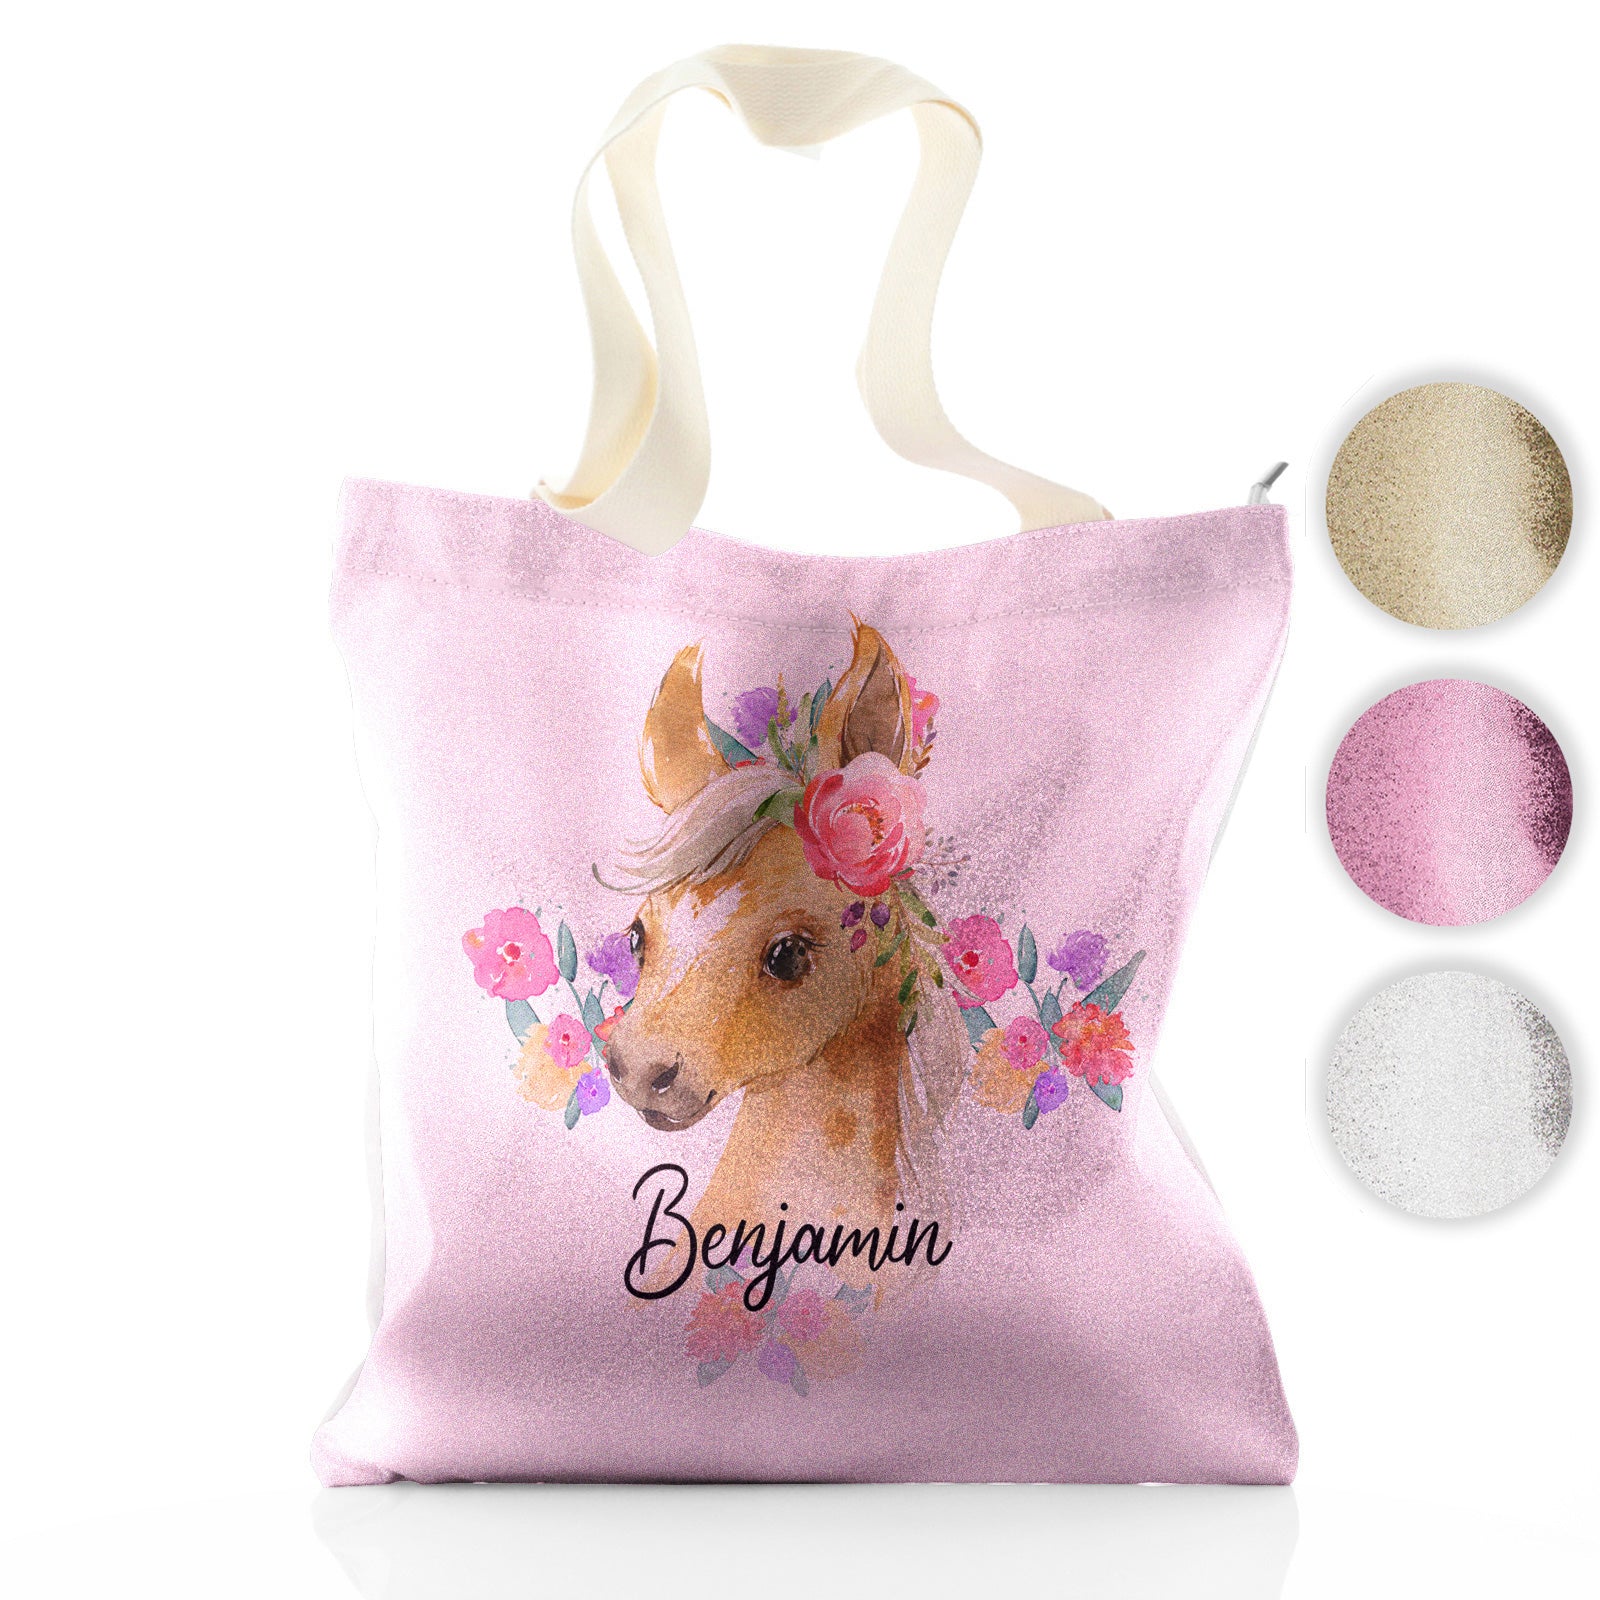 Personalised Glitter Tote Bag with Palomino Horse Multicolour Flower Print and Cute Text